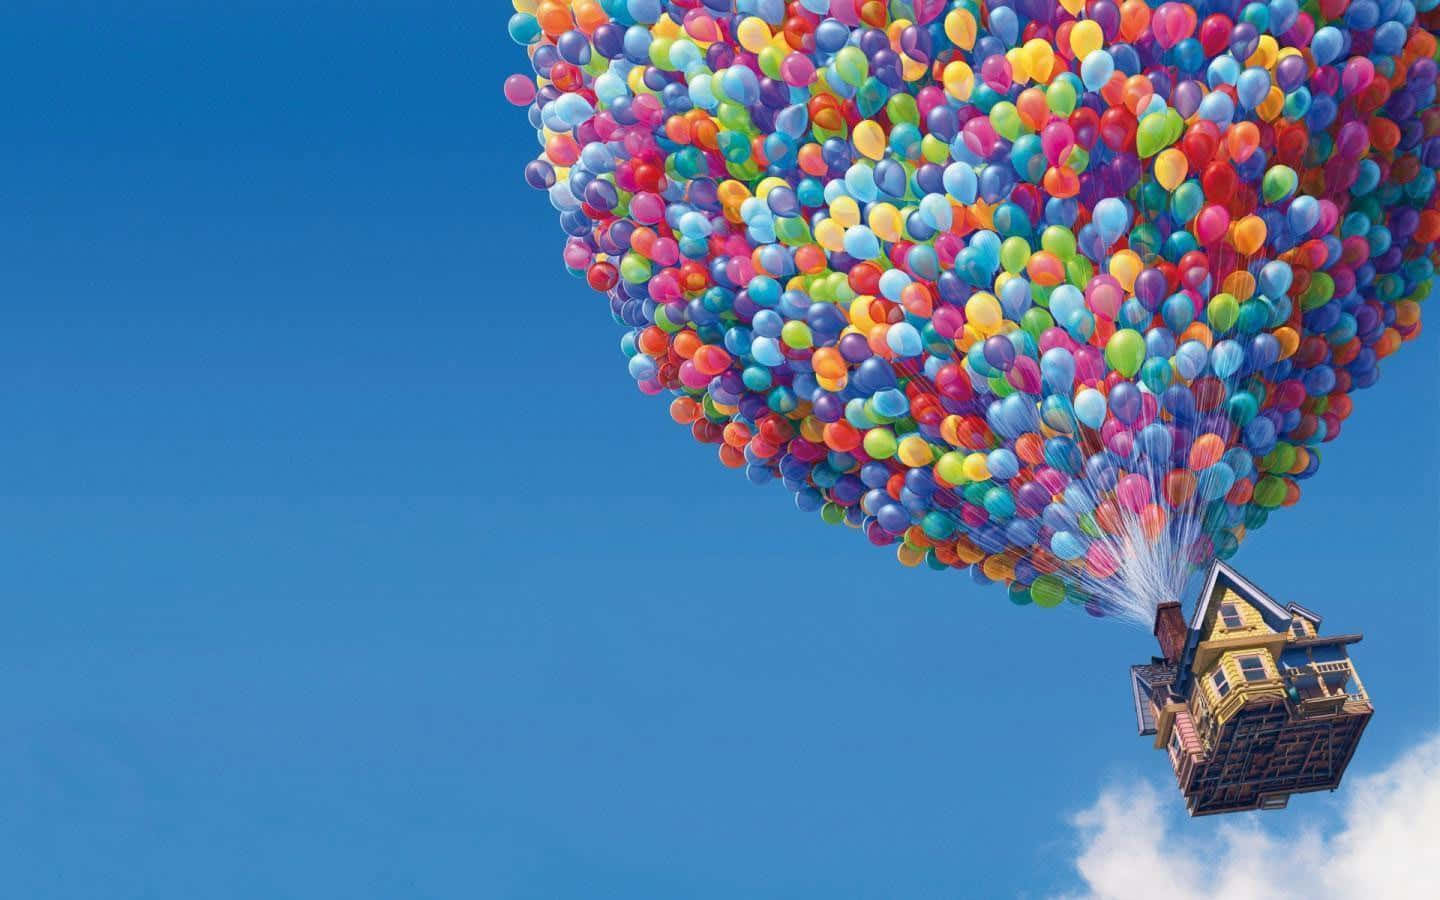 Disney Computer Up House Flying With Balloons Wallpaper